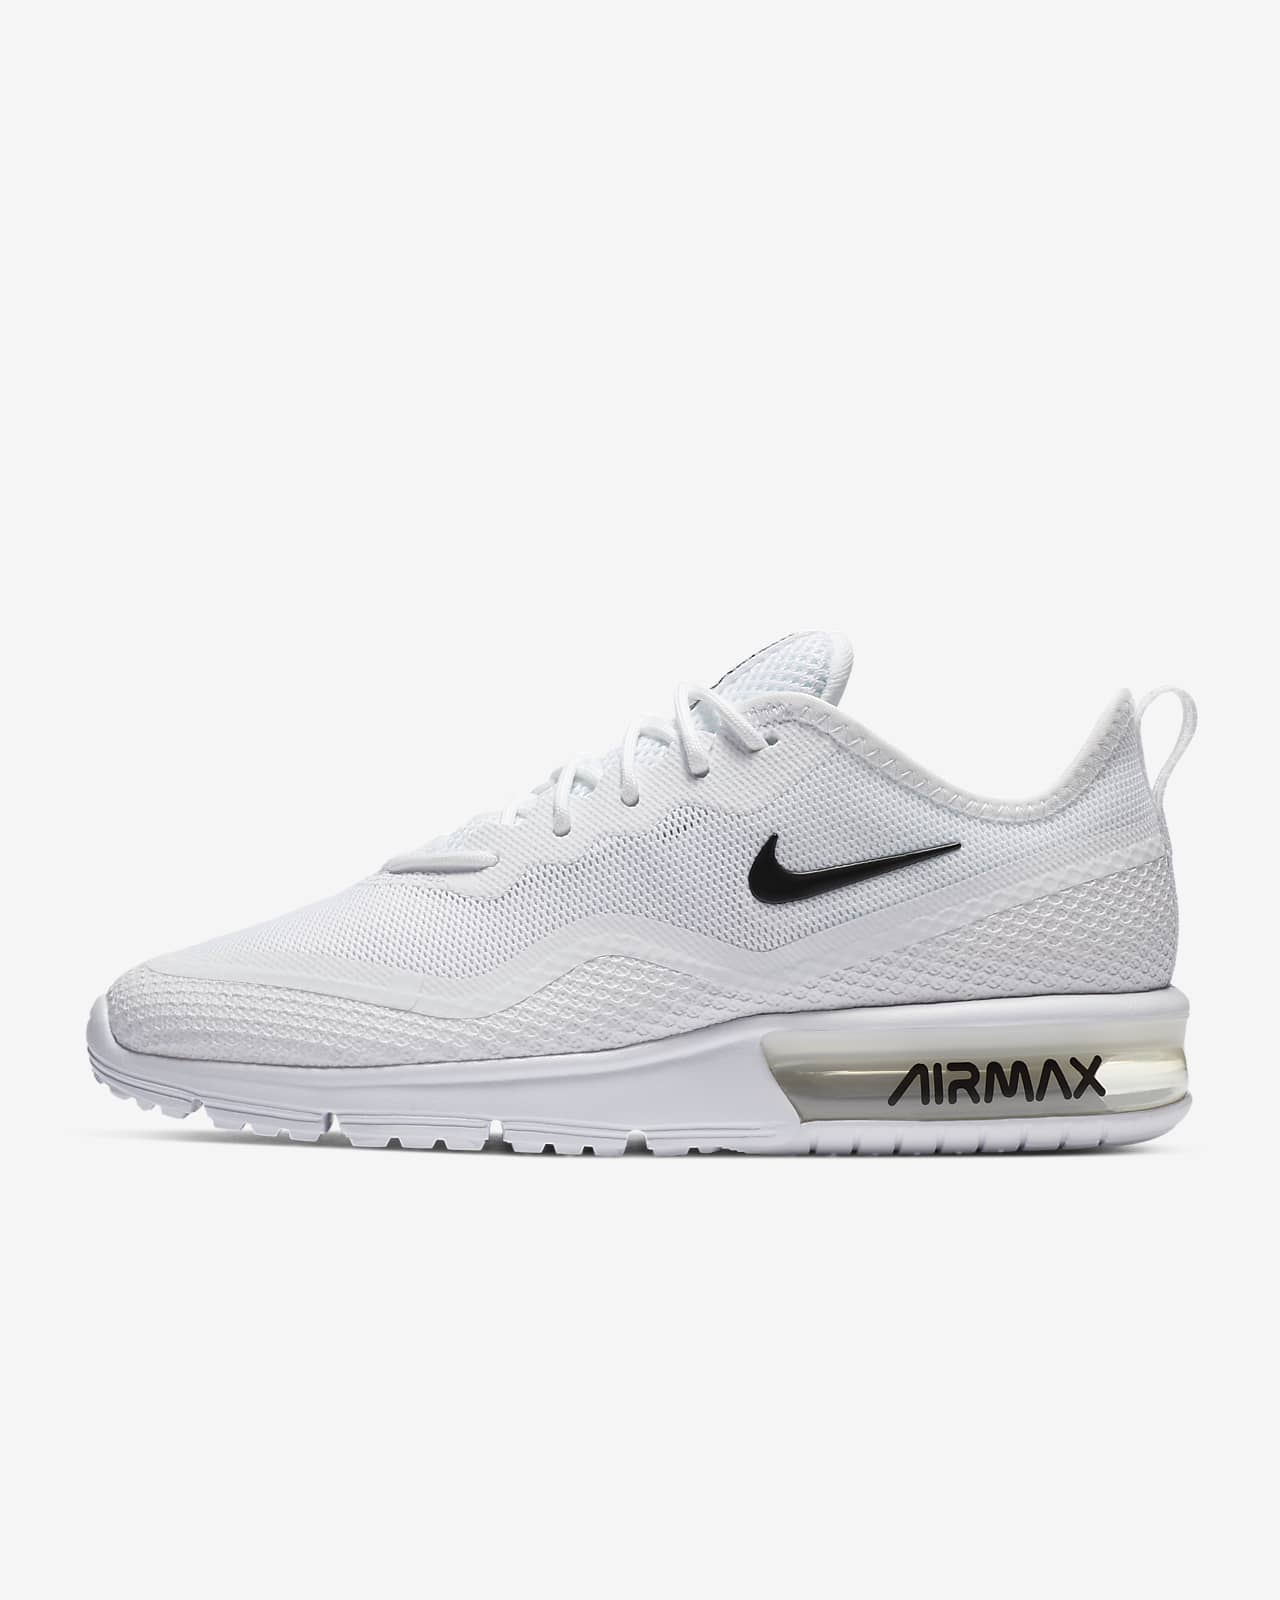 Nike Air Max Sequent 4.5 Women's Shoe 